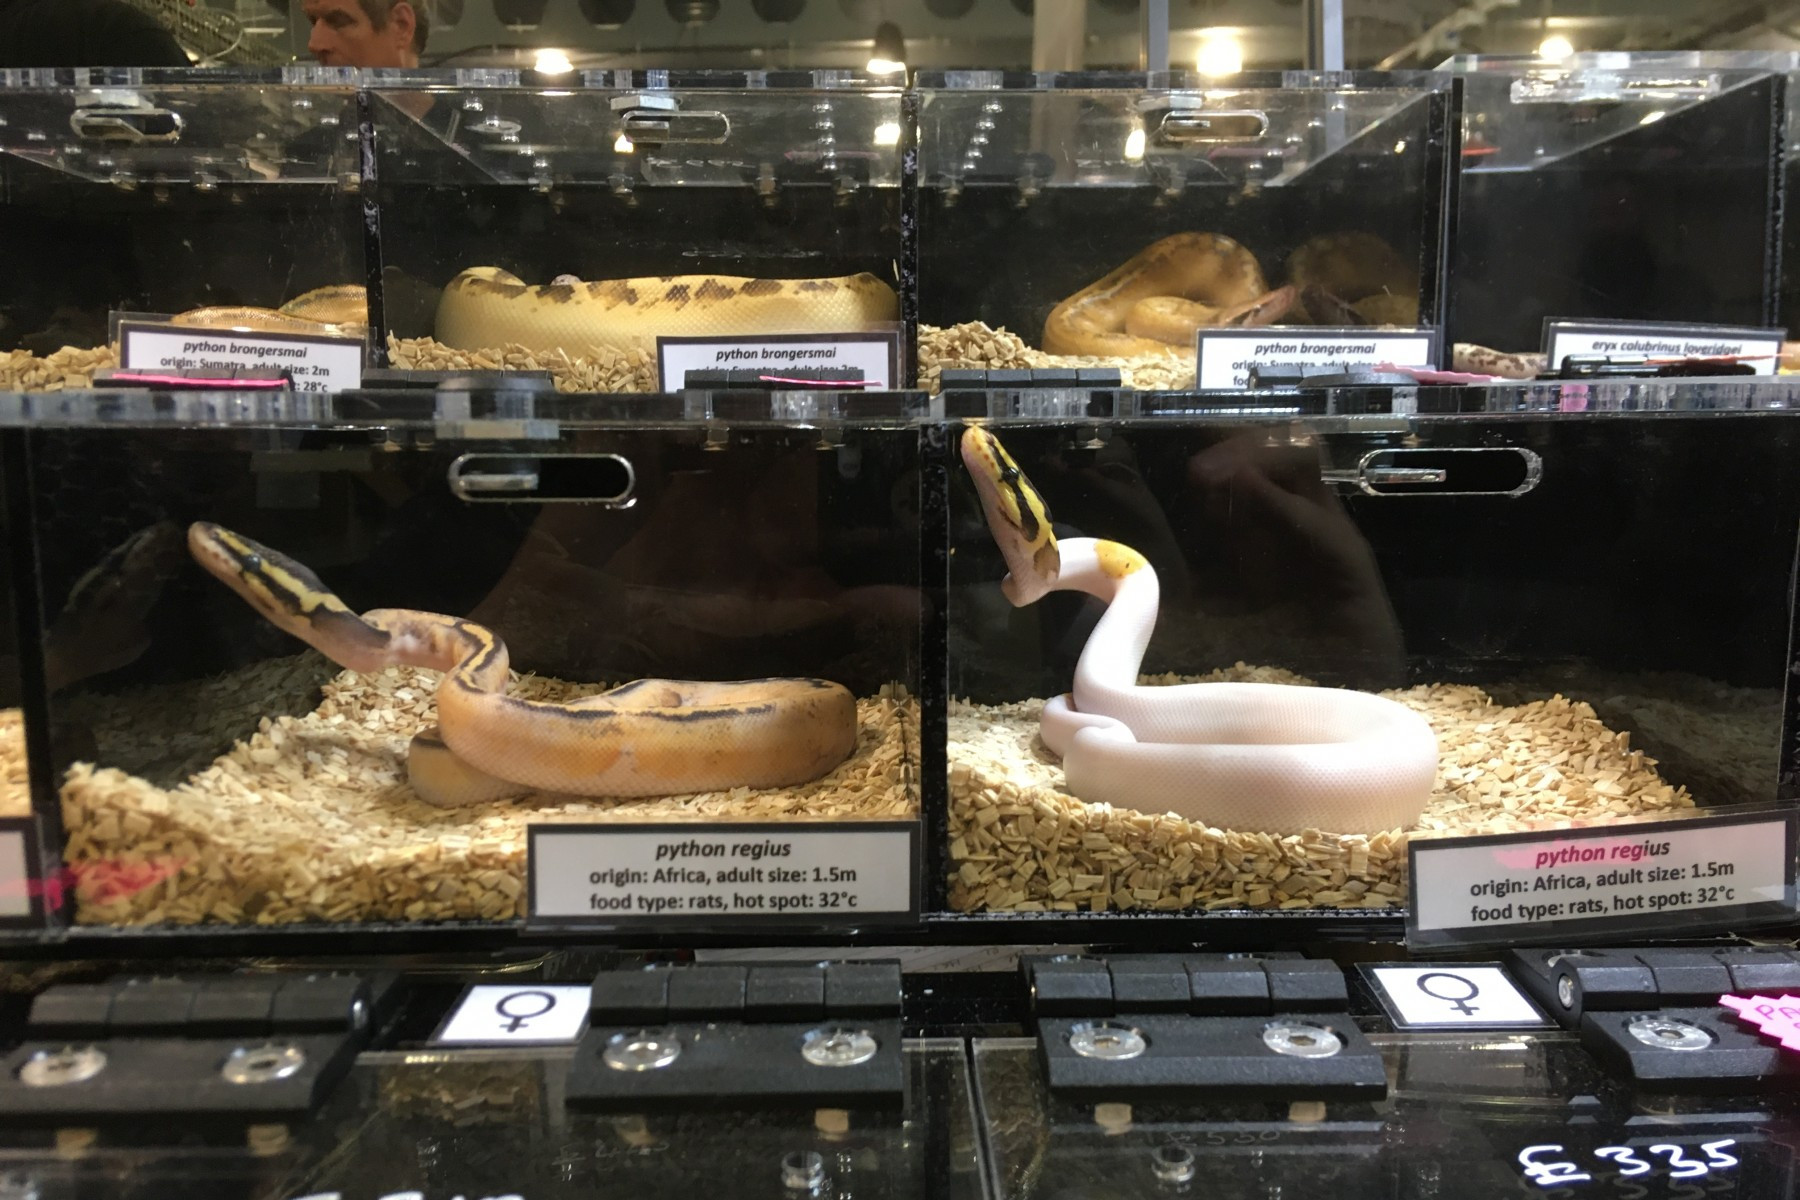 Pictured: Snakes kept in small enclosures at a reptile expo.